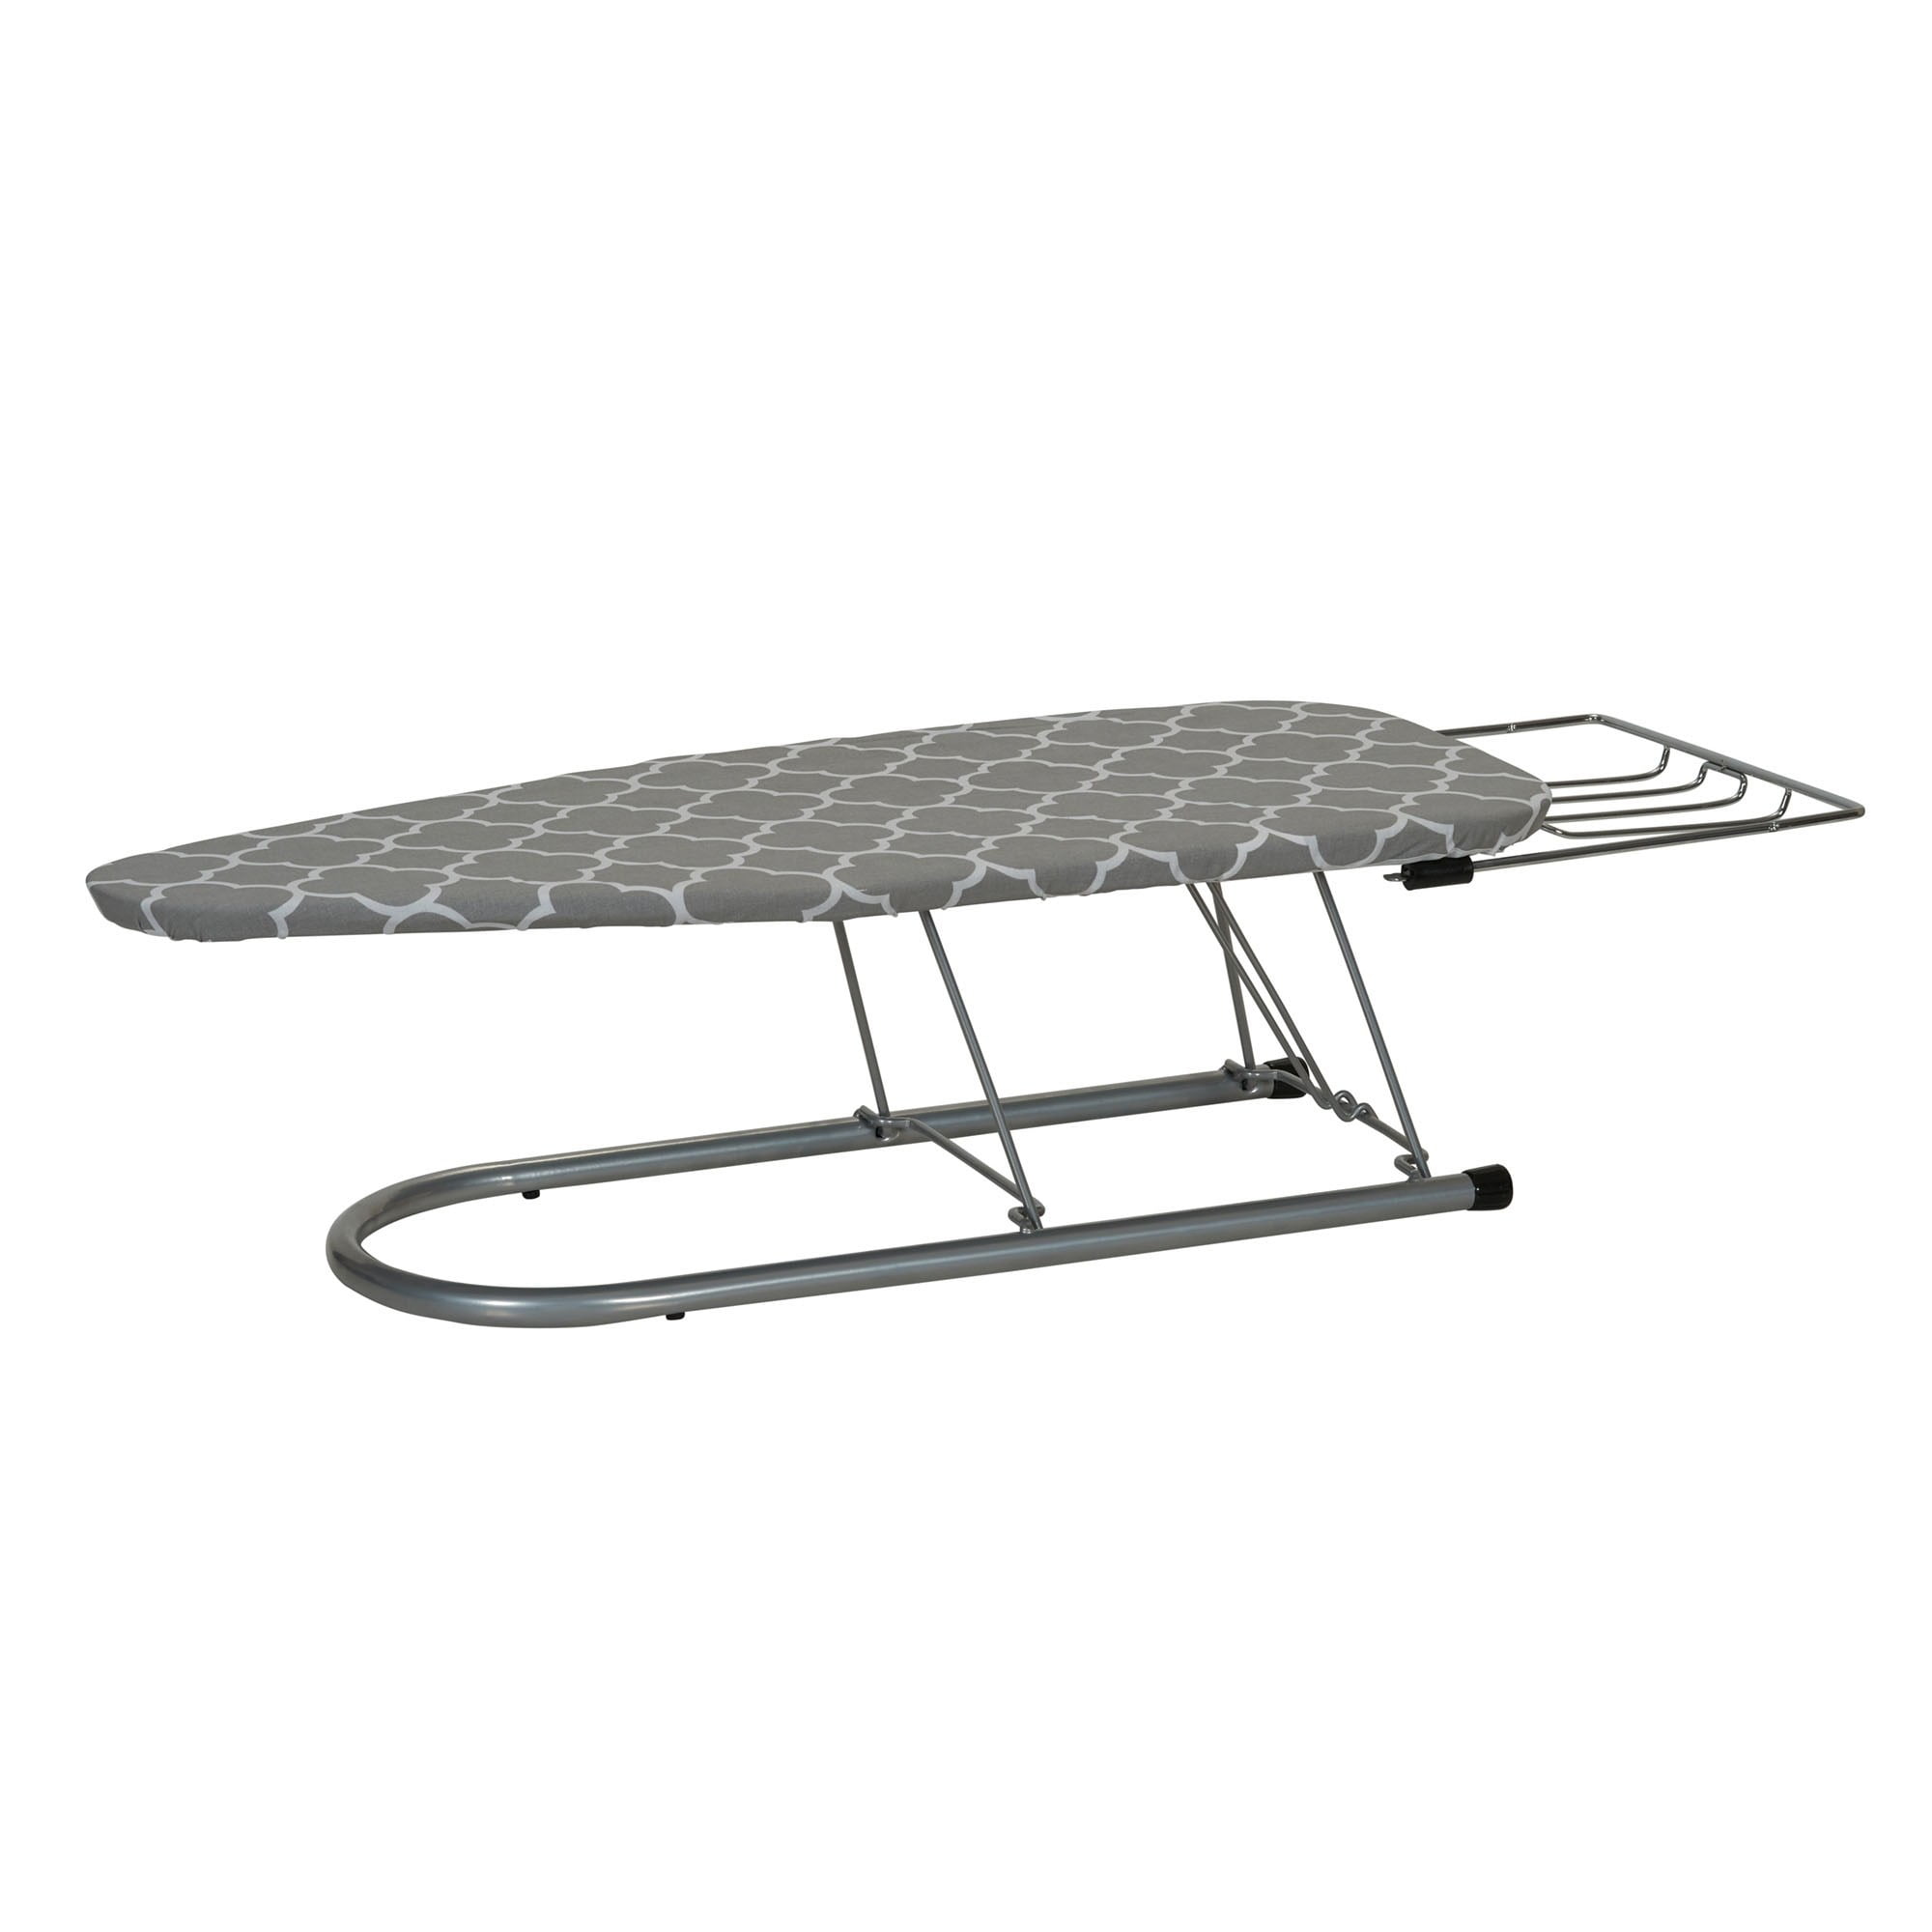  BKTD Small Ironing Board, Portable Tabletop Mini Ironing Board,  Countertop Foldable Iron Board With Iron Rest Heat Resistant Cover, Space  Saver For Laundry Dorms and Travel. 32*12 Inches, Brown Color. 